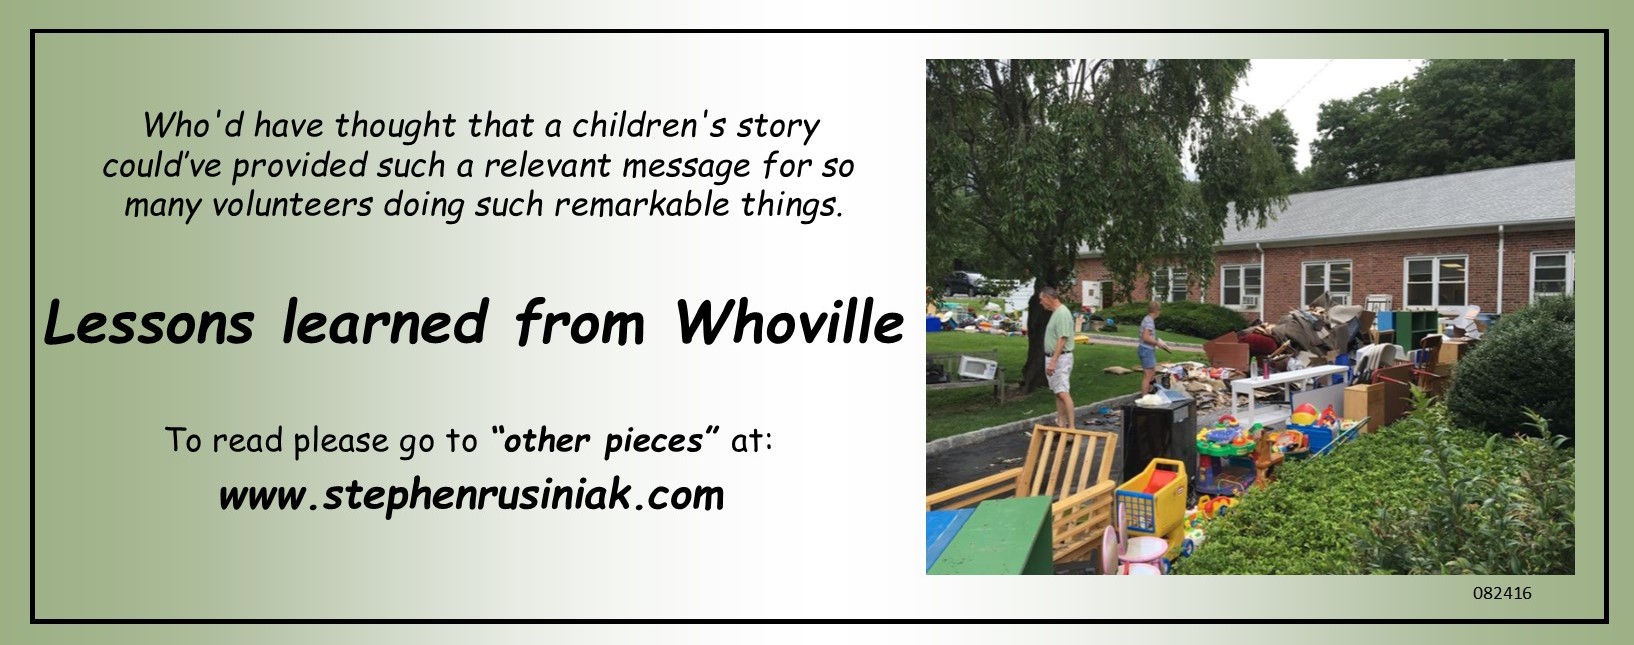 Lessons learned from Whoville 082416.jpg